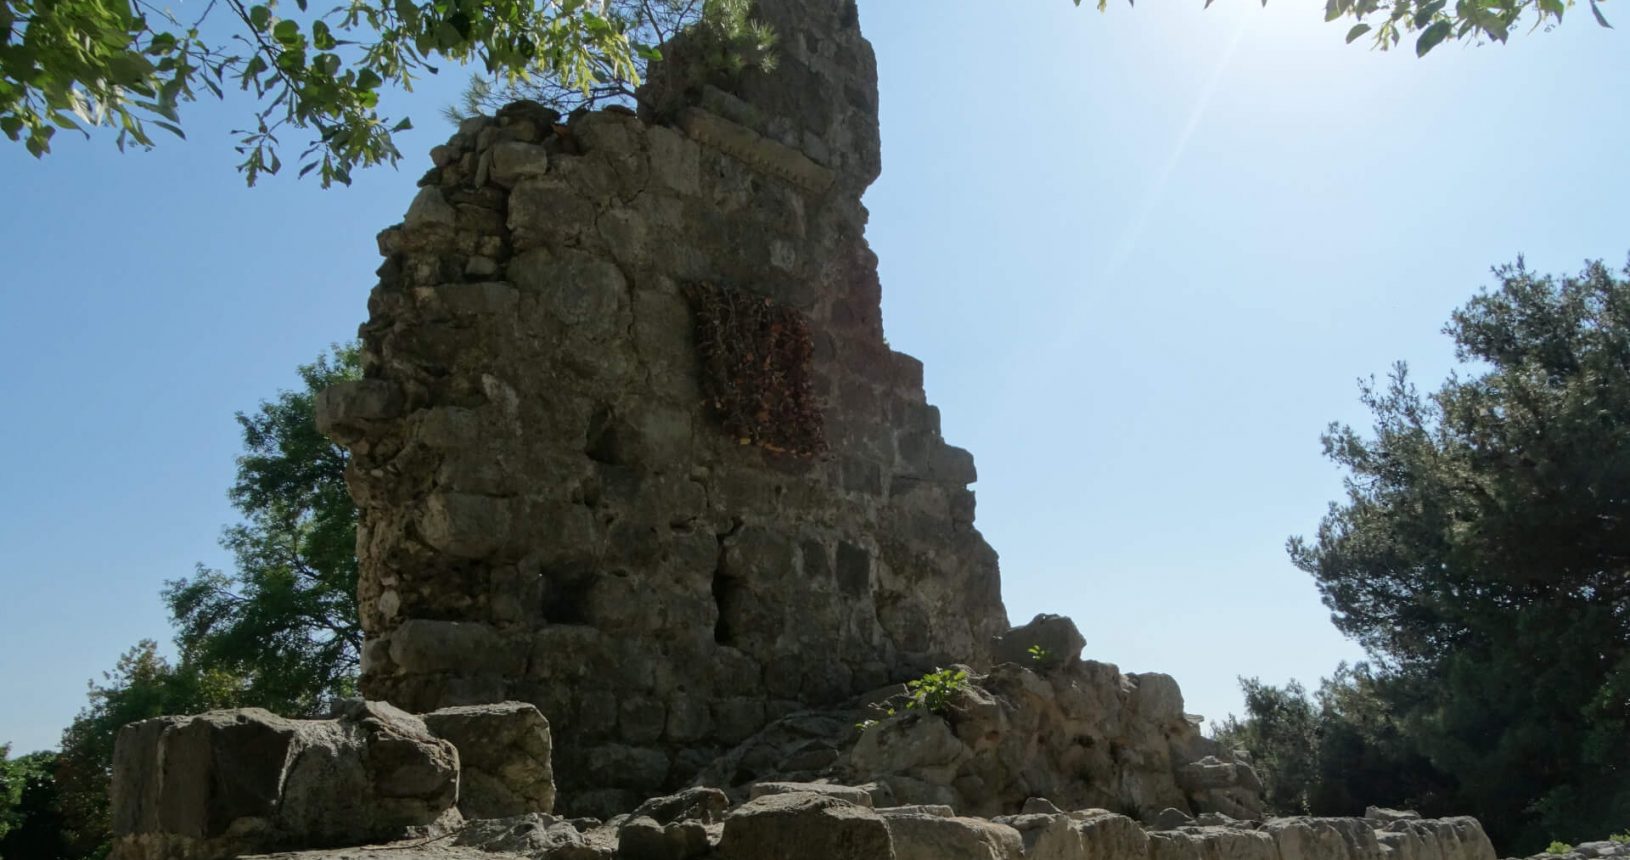 The ruins in the ancient town in Old Bar